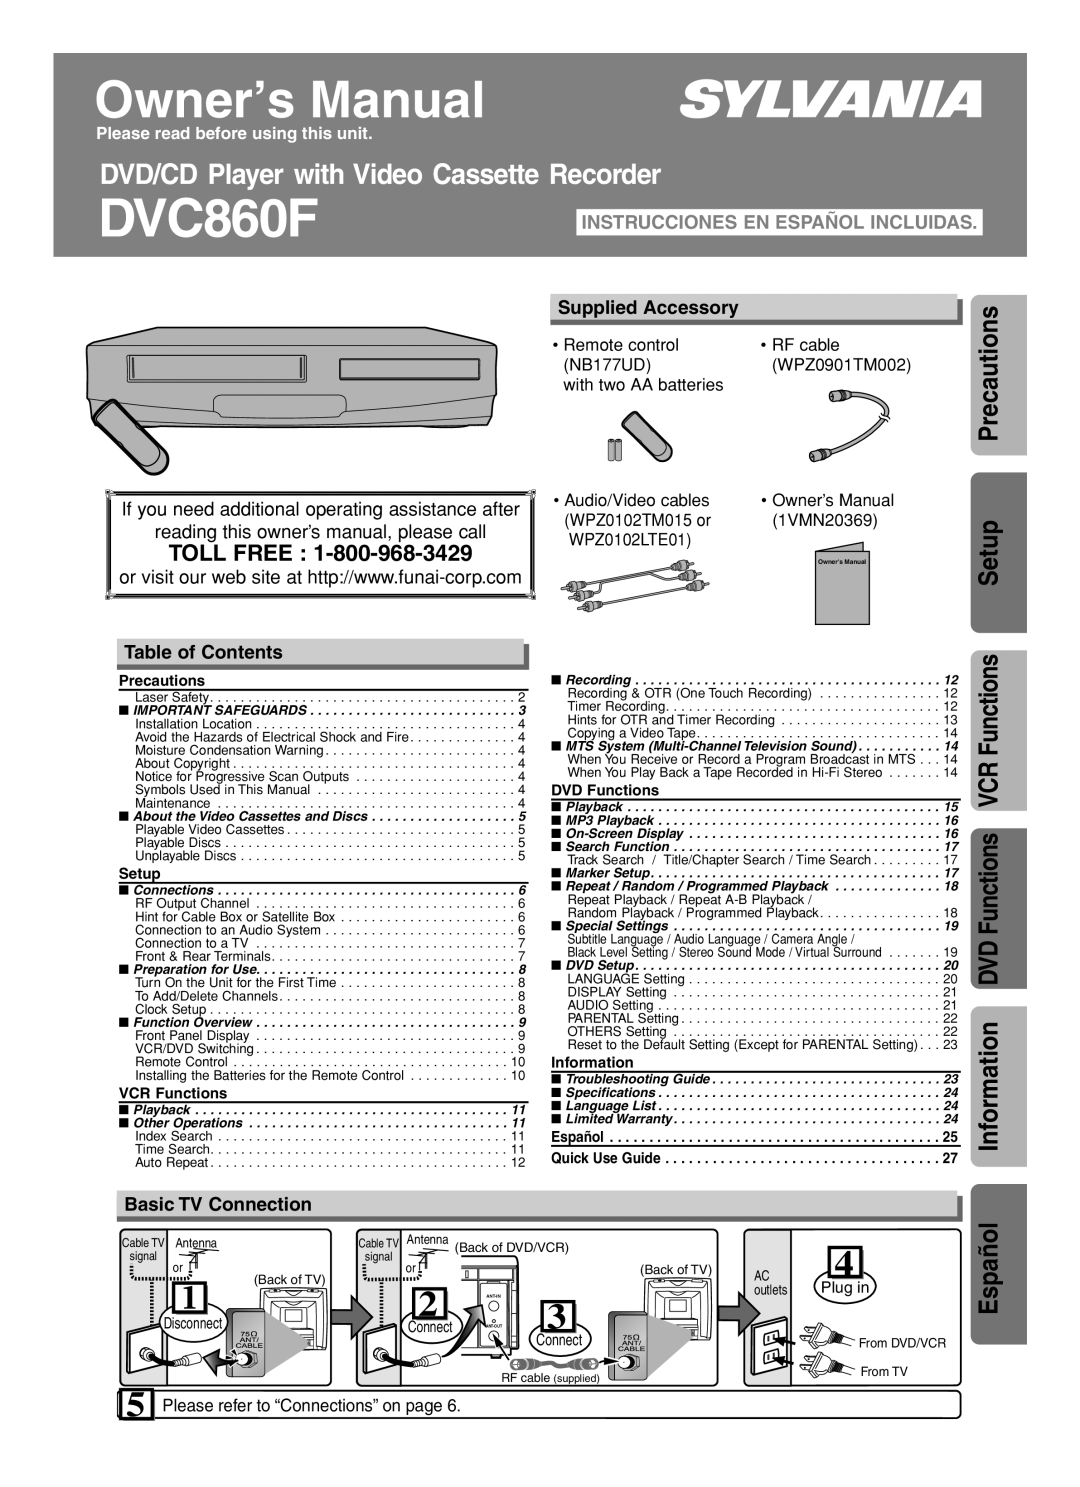 Sylvania DVC860F owner manual Precautions, Español, Toll Free, Information DVD Functions VCR Functions Setup, RF cable 